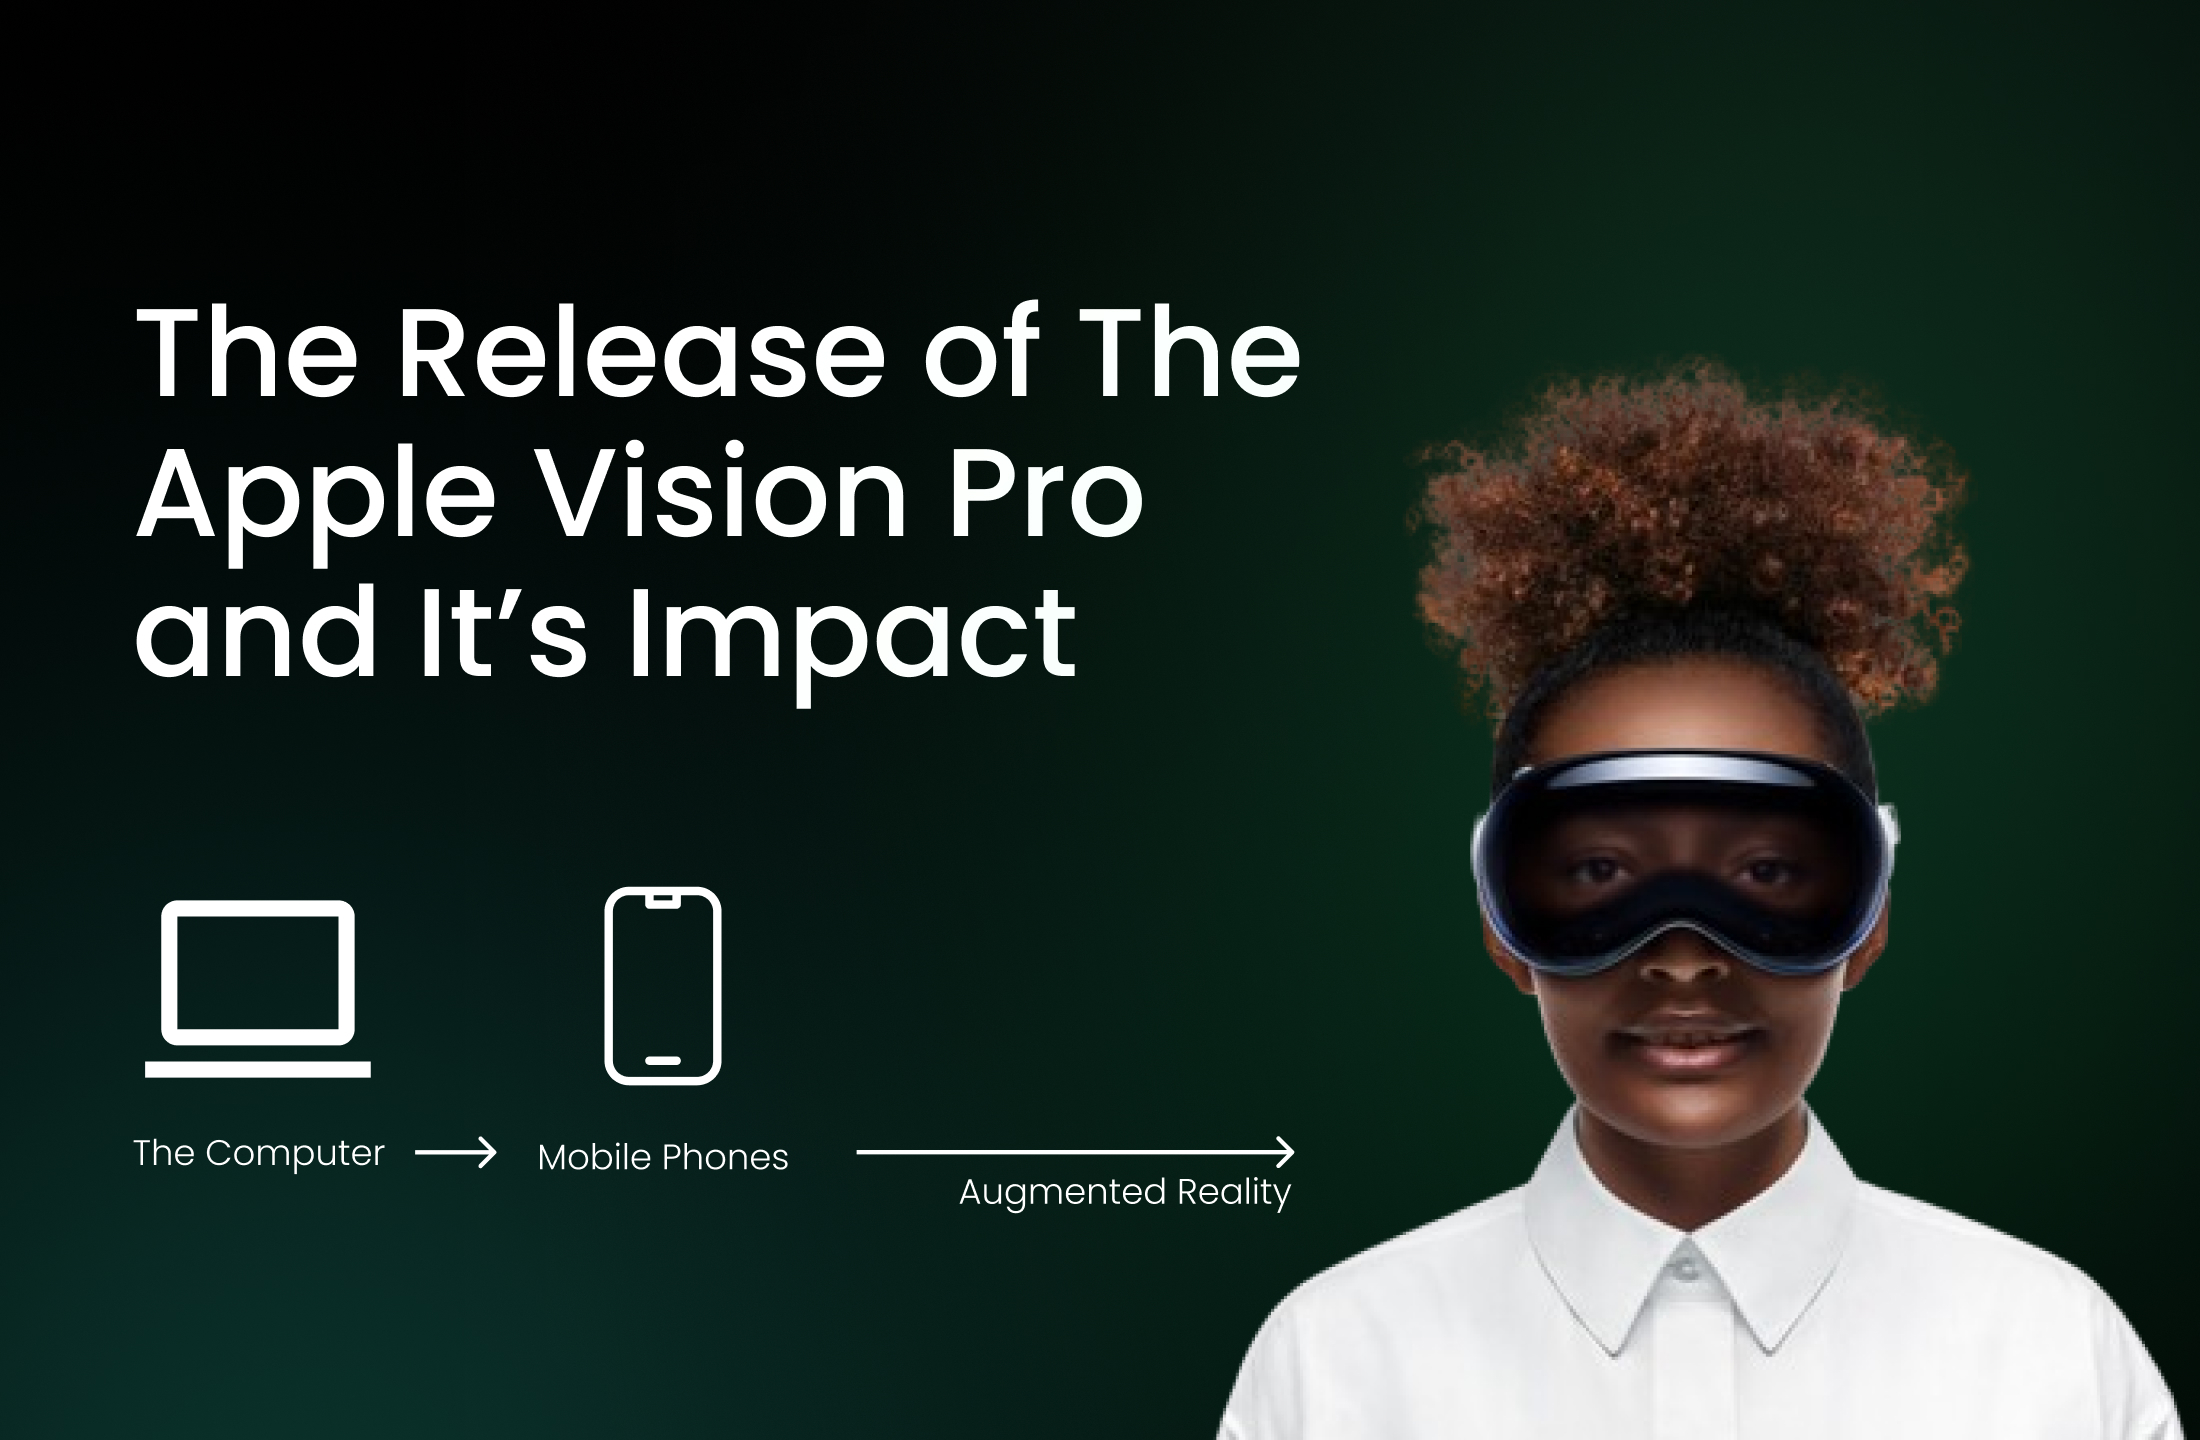 The release of the apple vision pro and its impact on developers